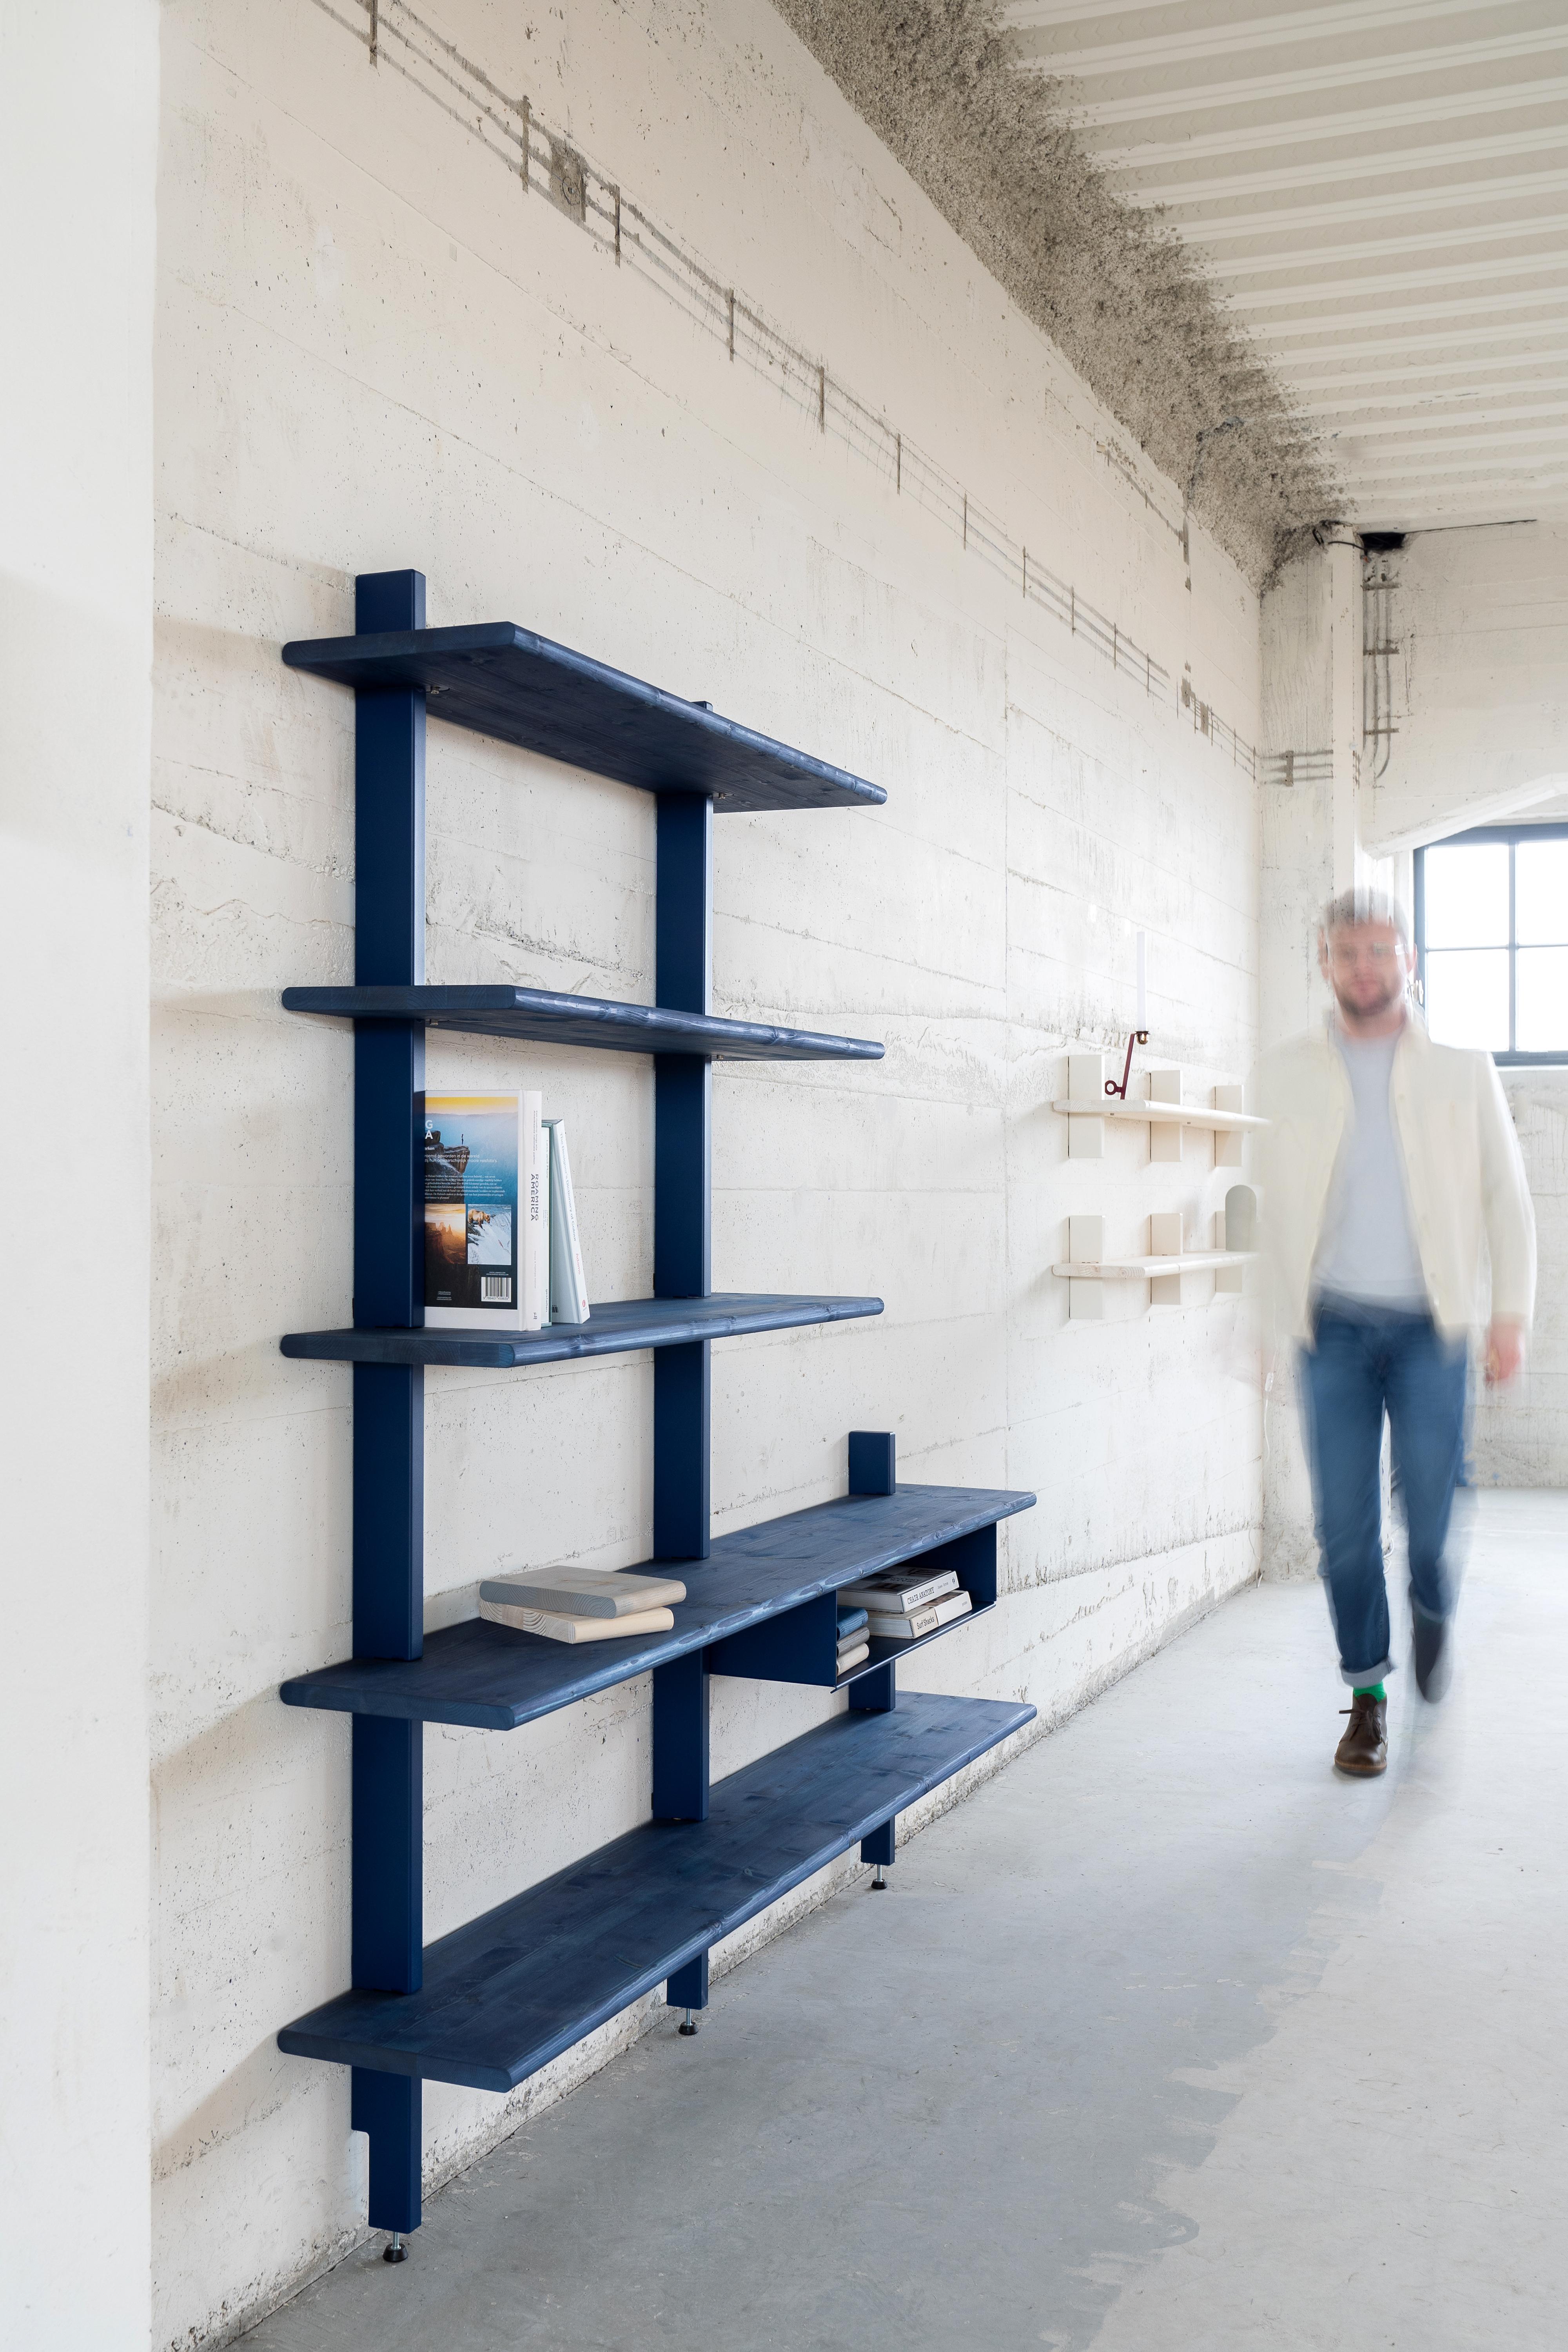 Pine consists - in addition to steel wall profiles - of pine shelves with a signature pattern and natural look. The new wall system offers endless possibilities; from a single wall shelf to a wall filling bookcase. 

The different parts are